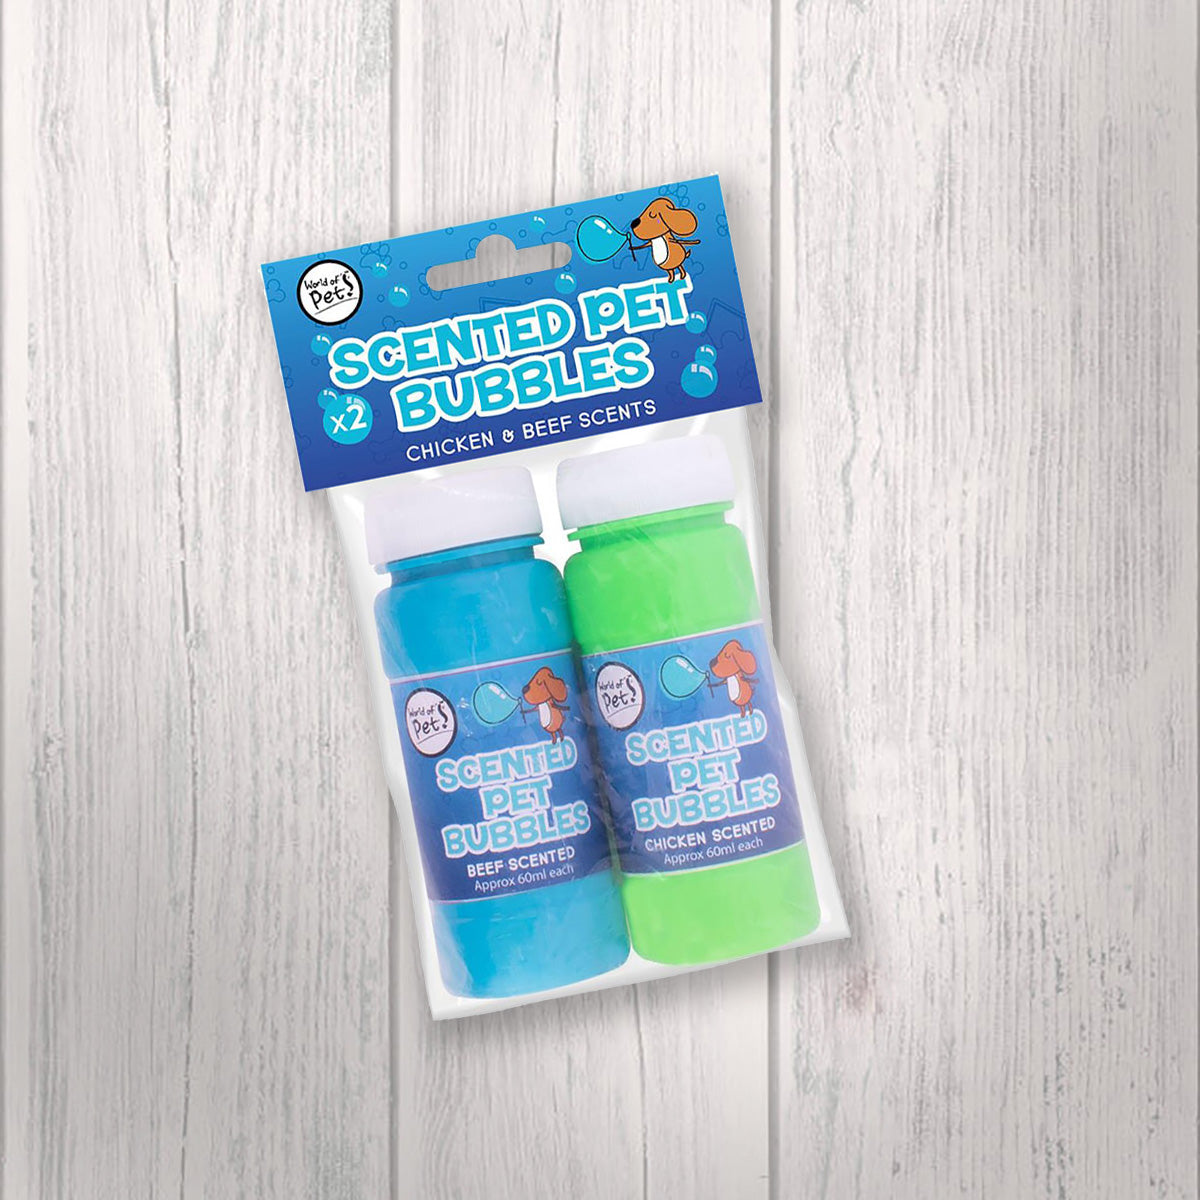 Beef and Chicken Scented Pet Bubbles